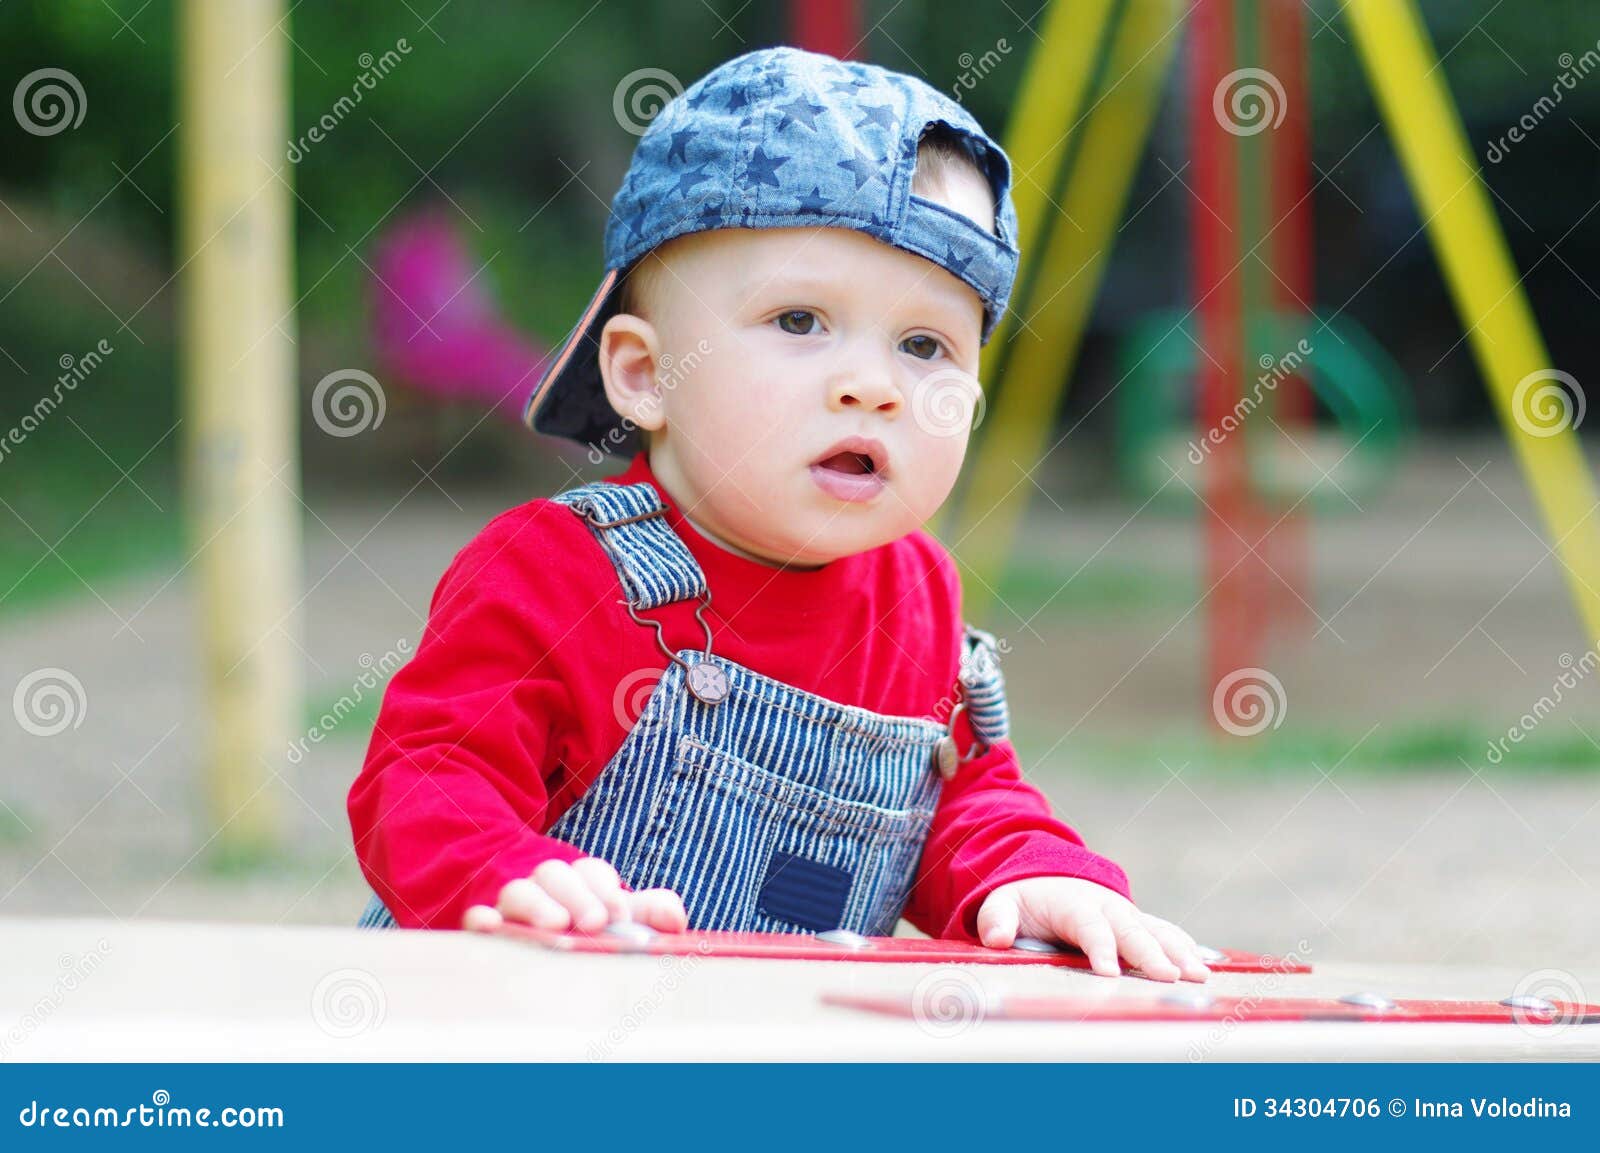 Lovely Baby on Playground in Summertime Stock Photo - Image of walking ...